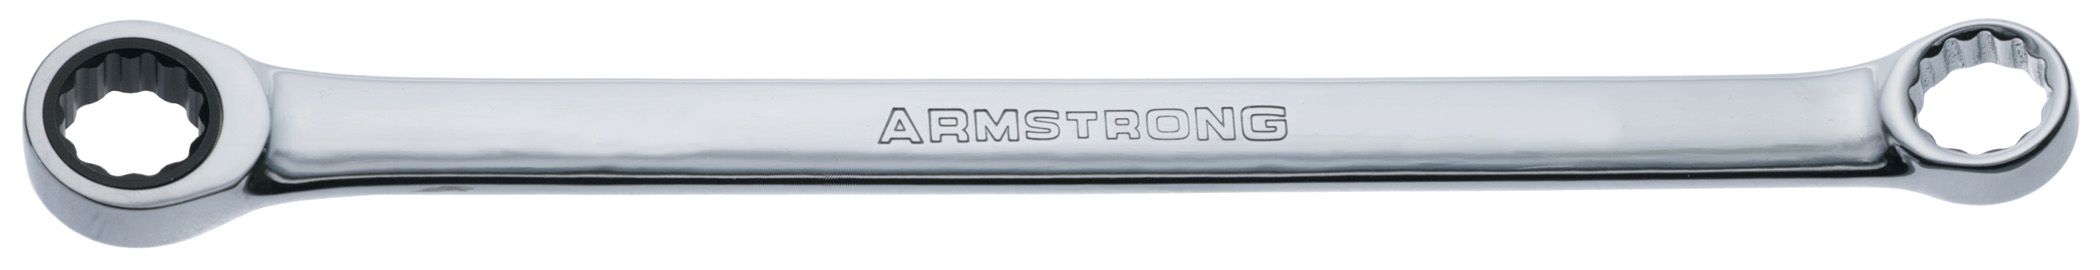 Armstrong 9/16 in. Box Ratcheting Wrench